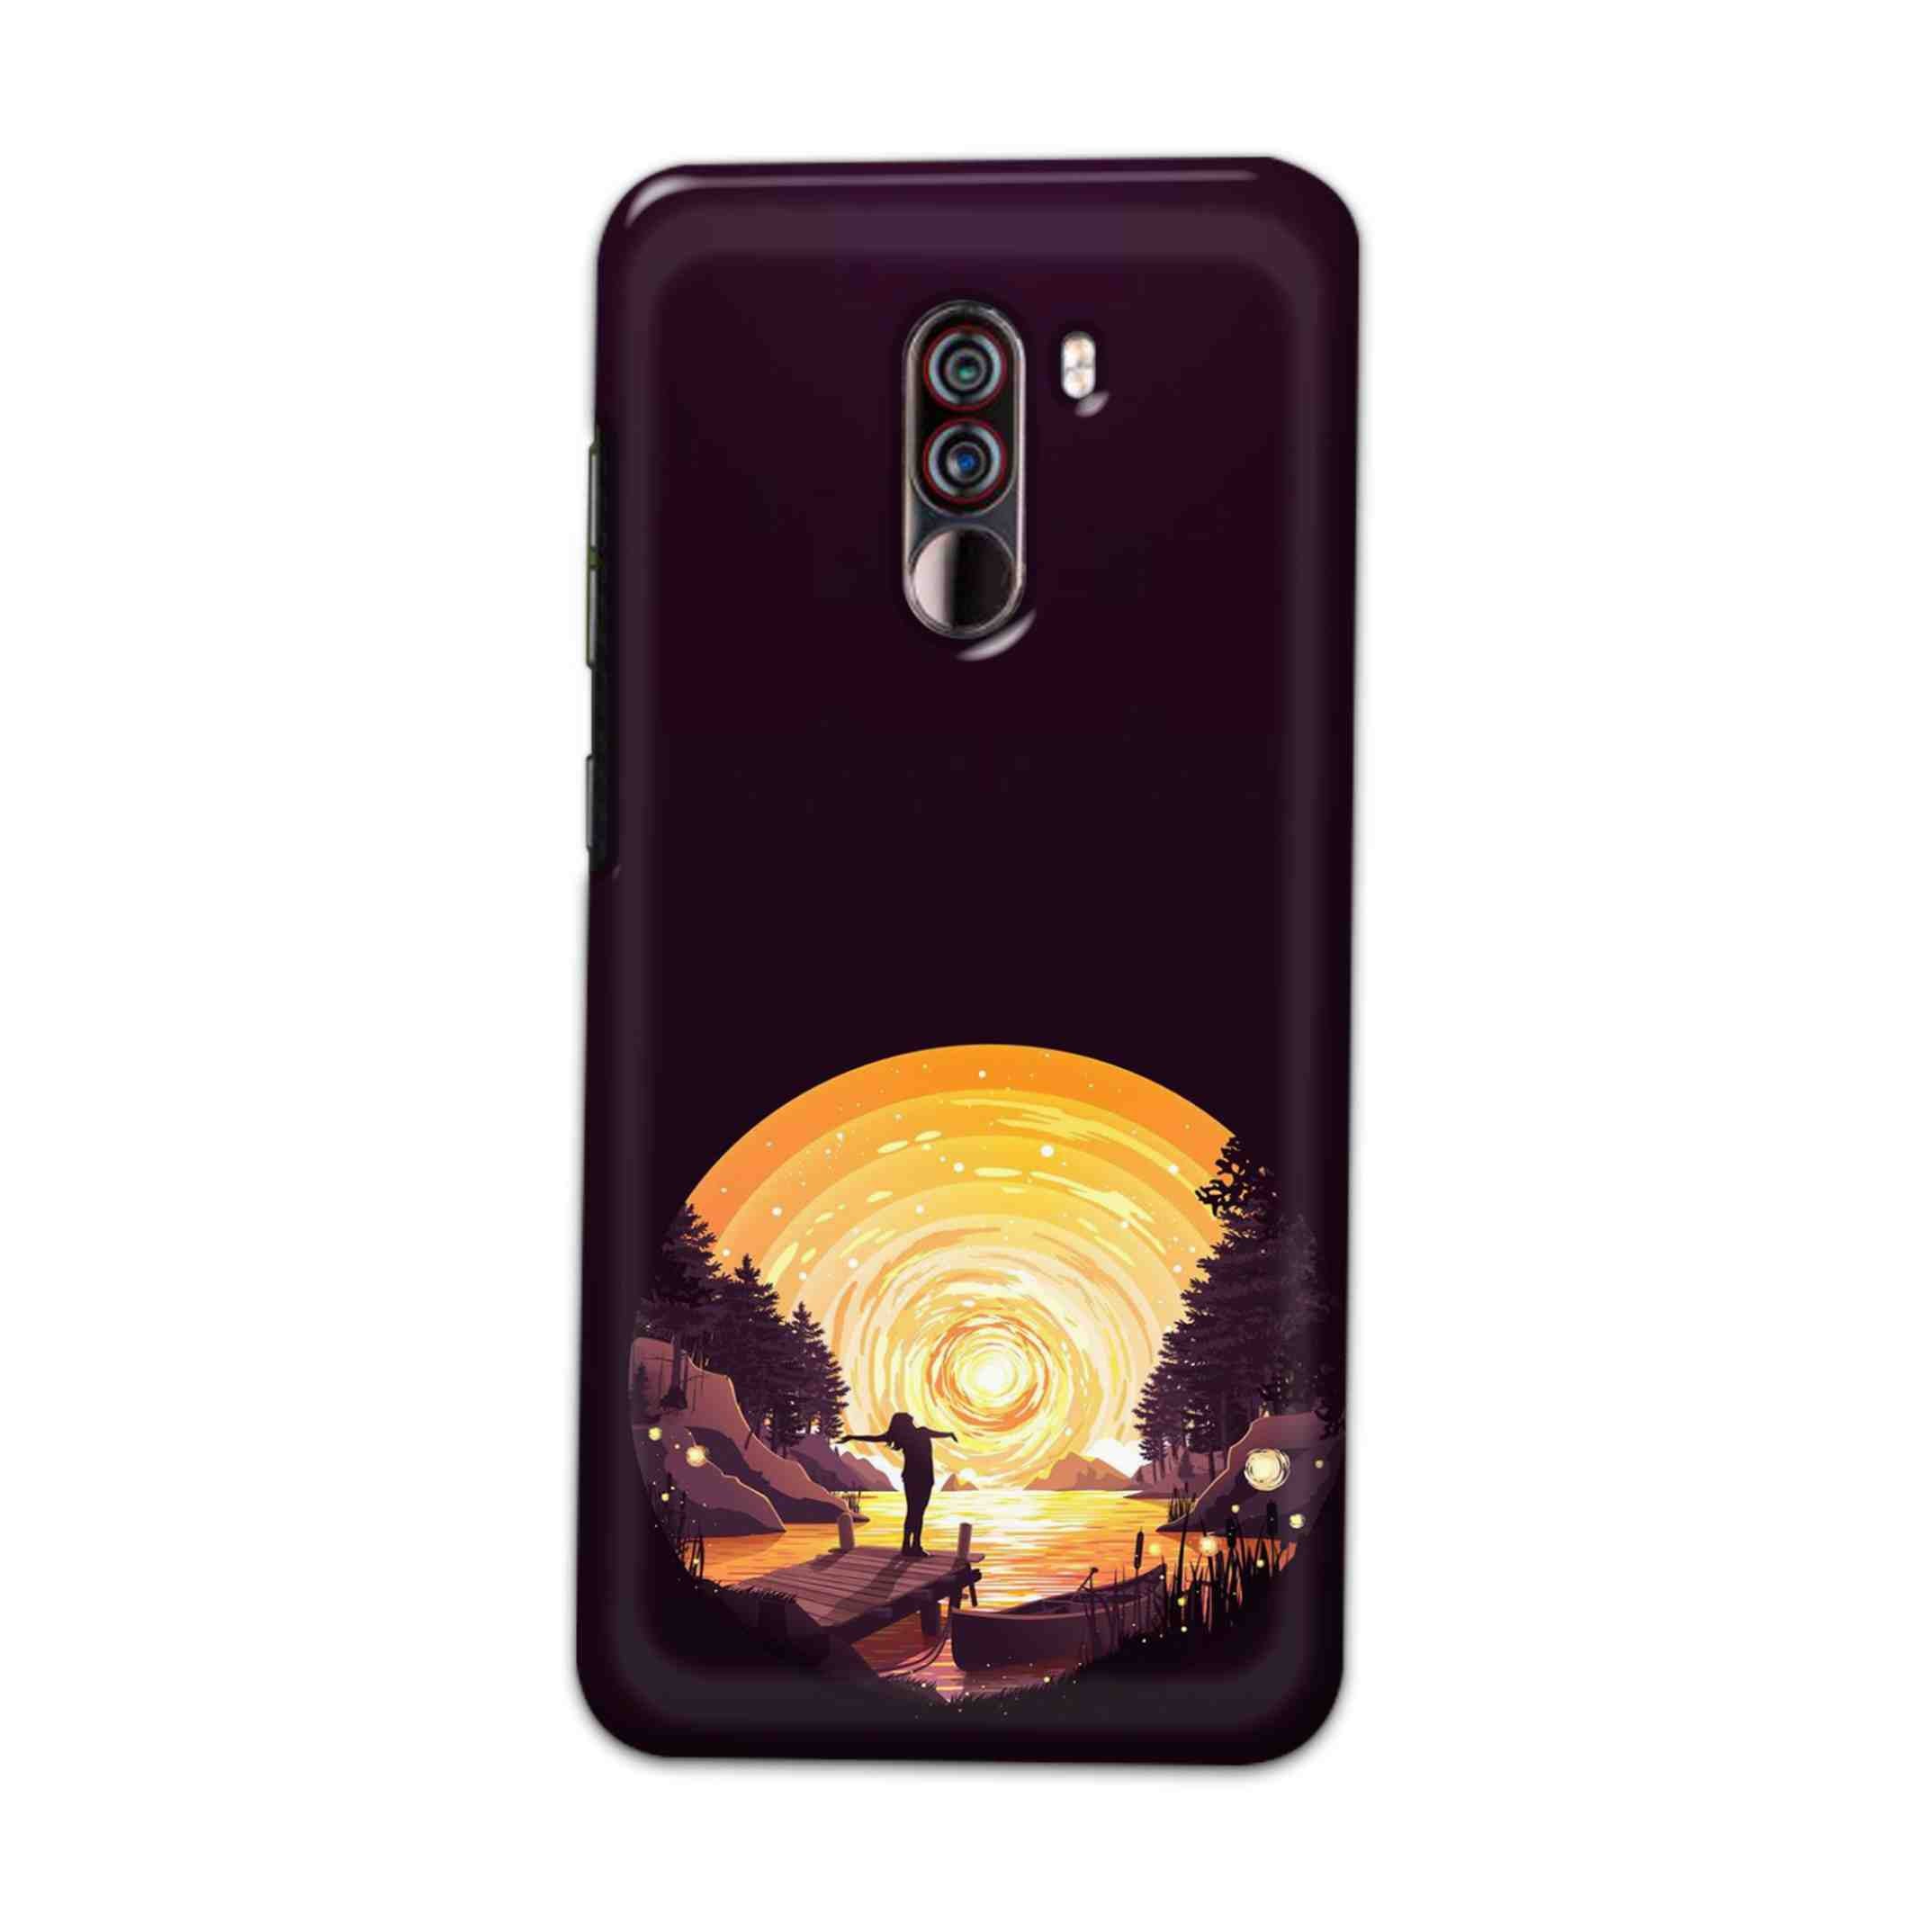 Buy Night Sunrise Hard Back Mobile Phone Case Cover For Xiaomi Pocophone F1 Online